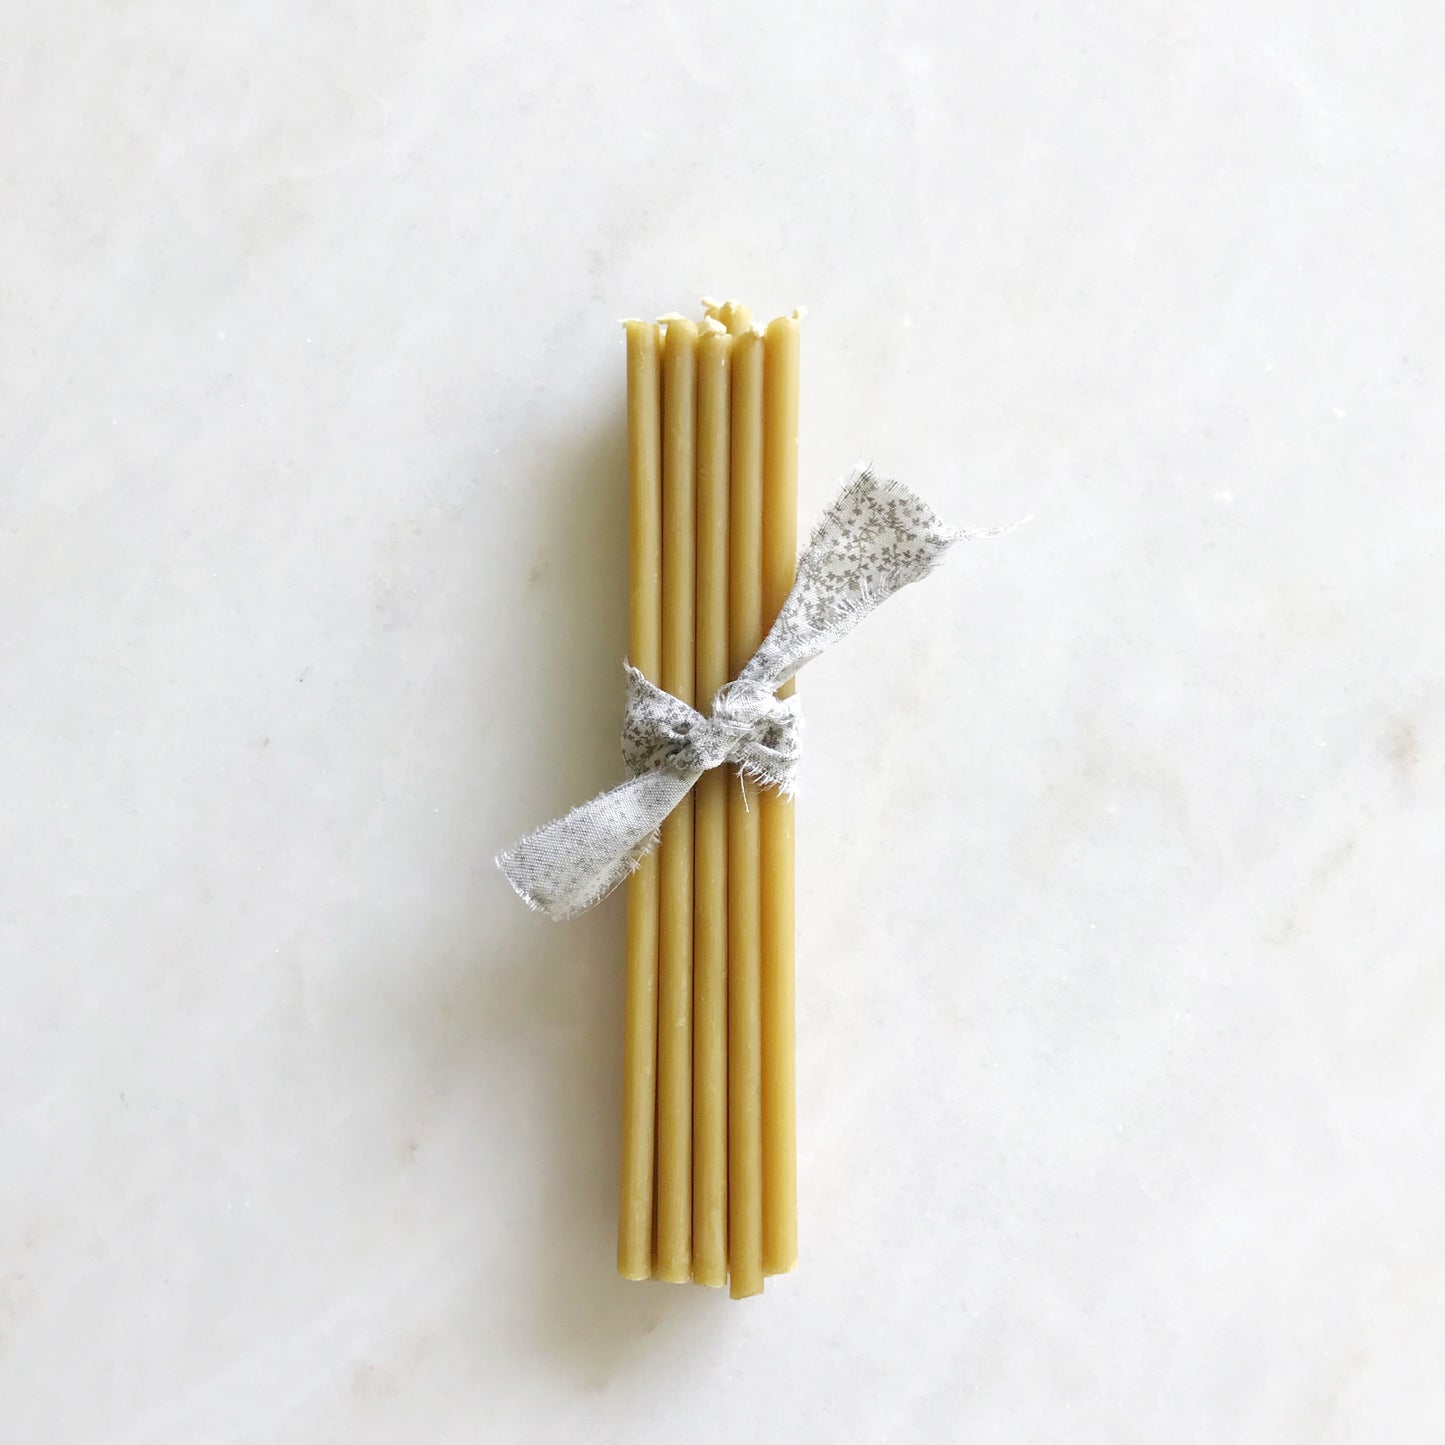 Bundle of Beeswax Birthday Candles, 12 ct